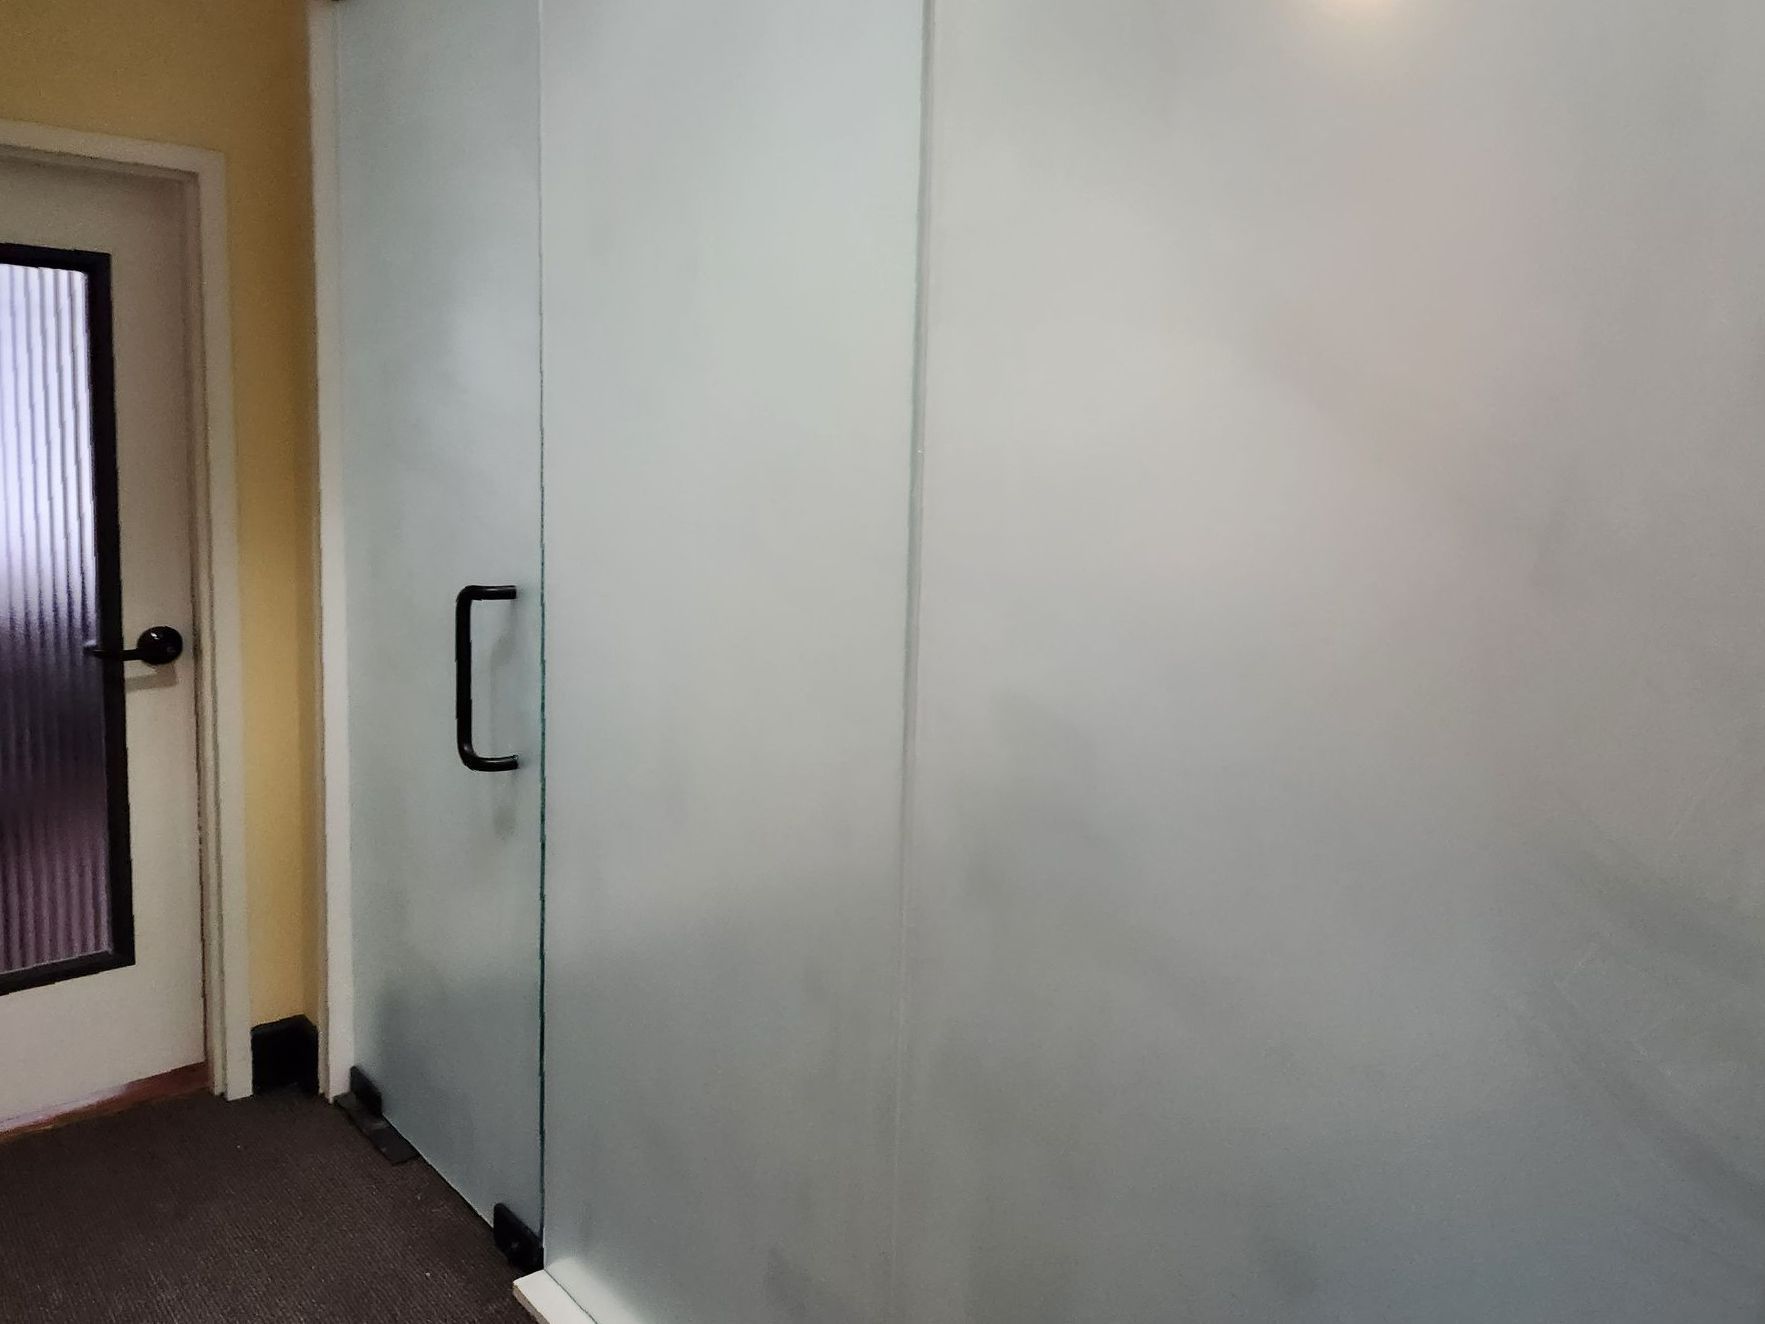 Frosted glass window treatment - SPF Precision Frost tint installed to interior office glass doors and windows adding privacy, style, comfort, and Dust-Free function.